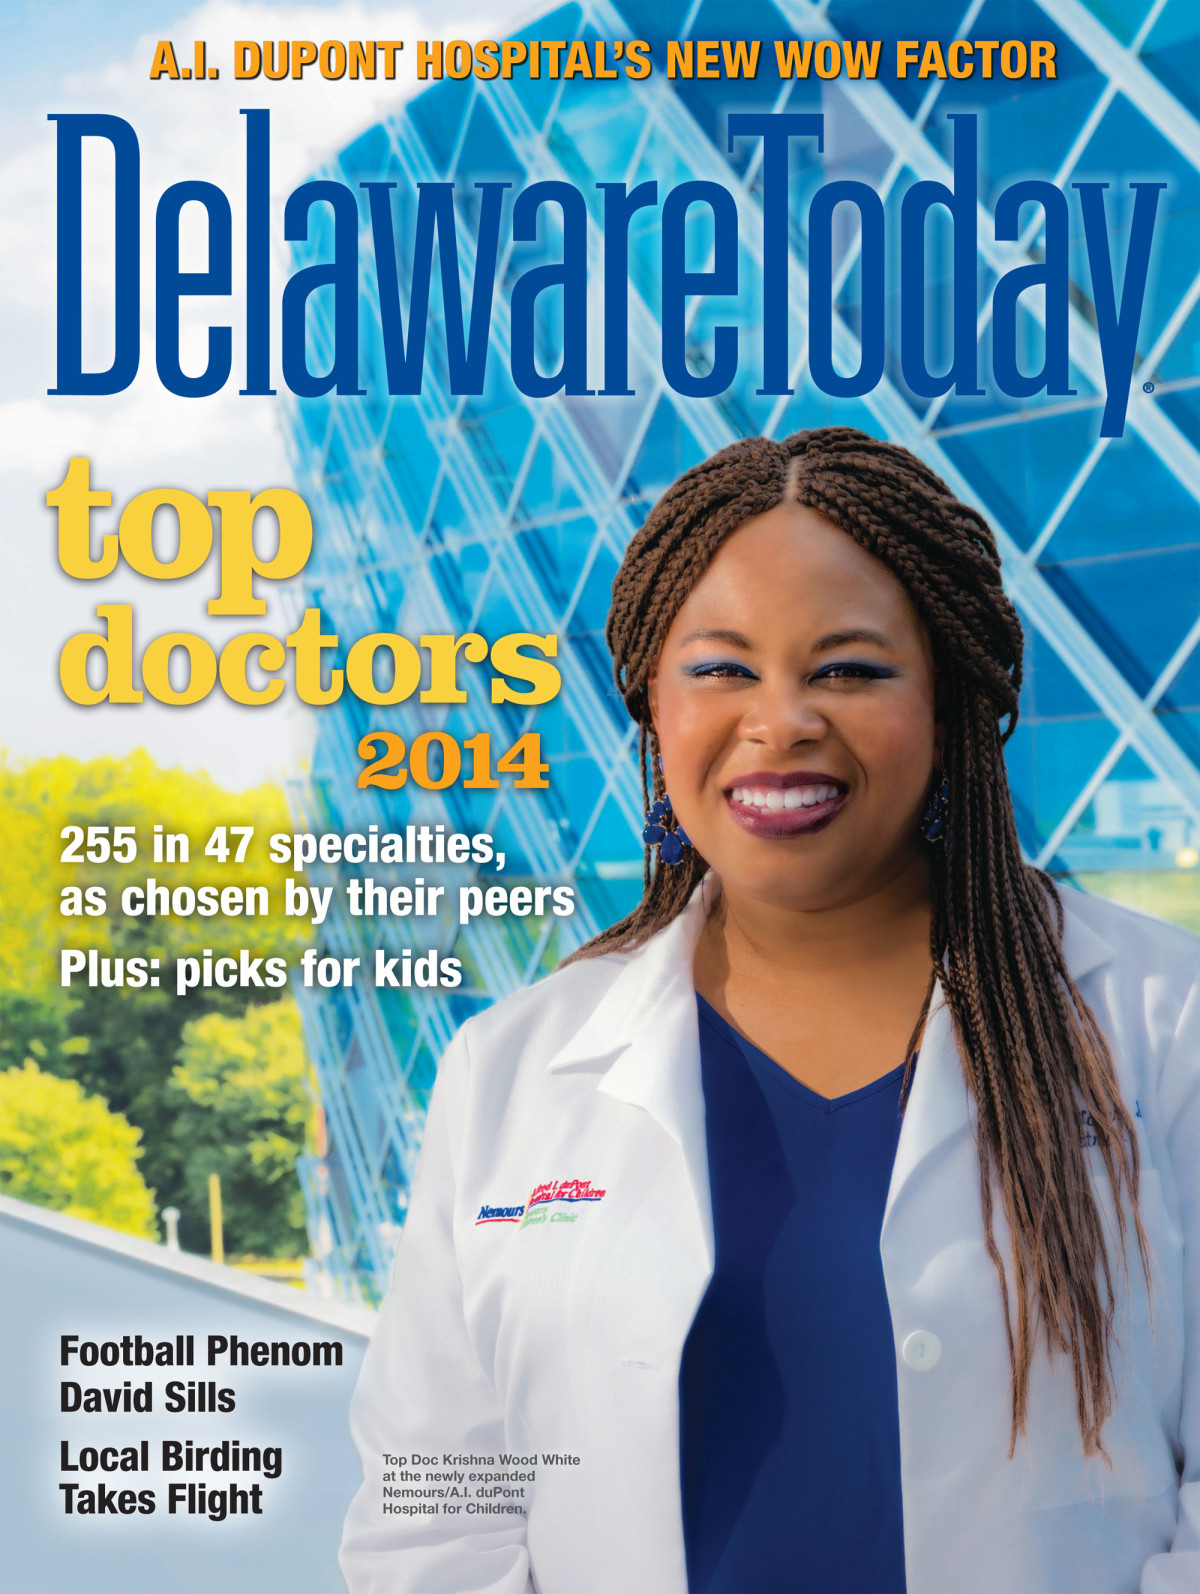 Delaware Today 'Top Doctors' list includes more than 100 from